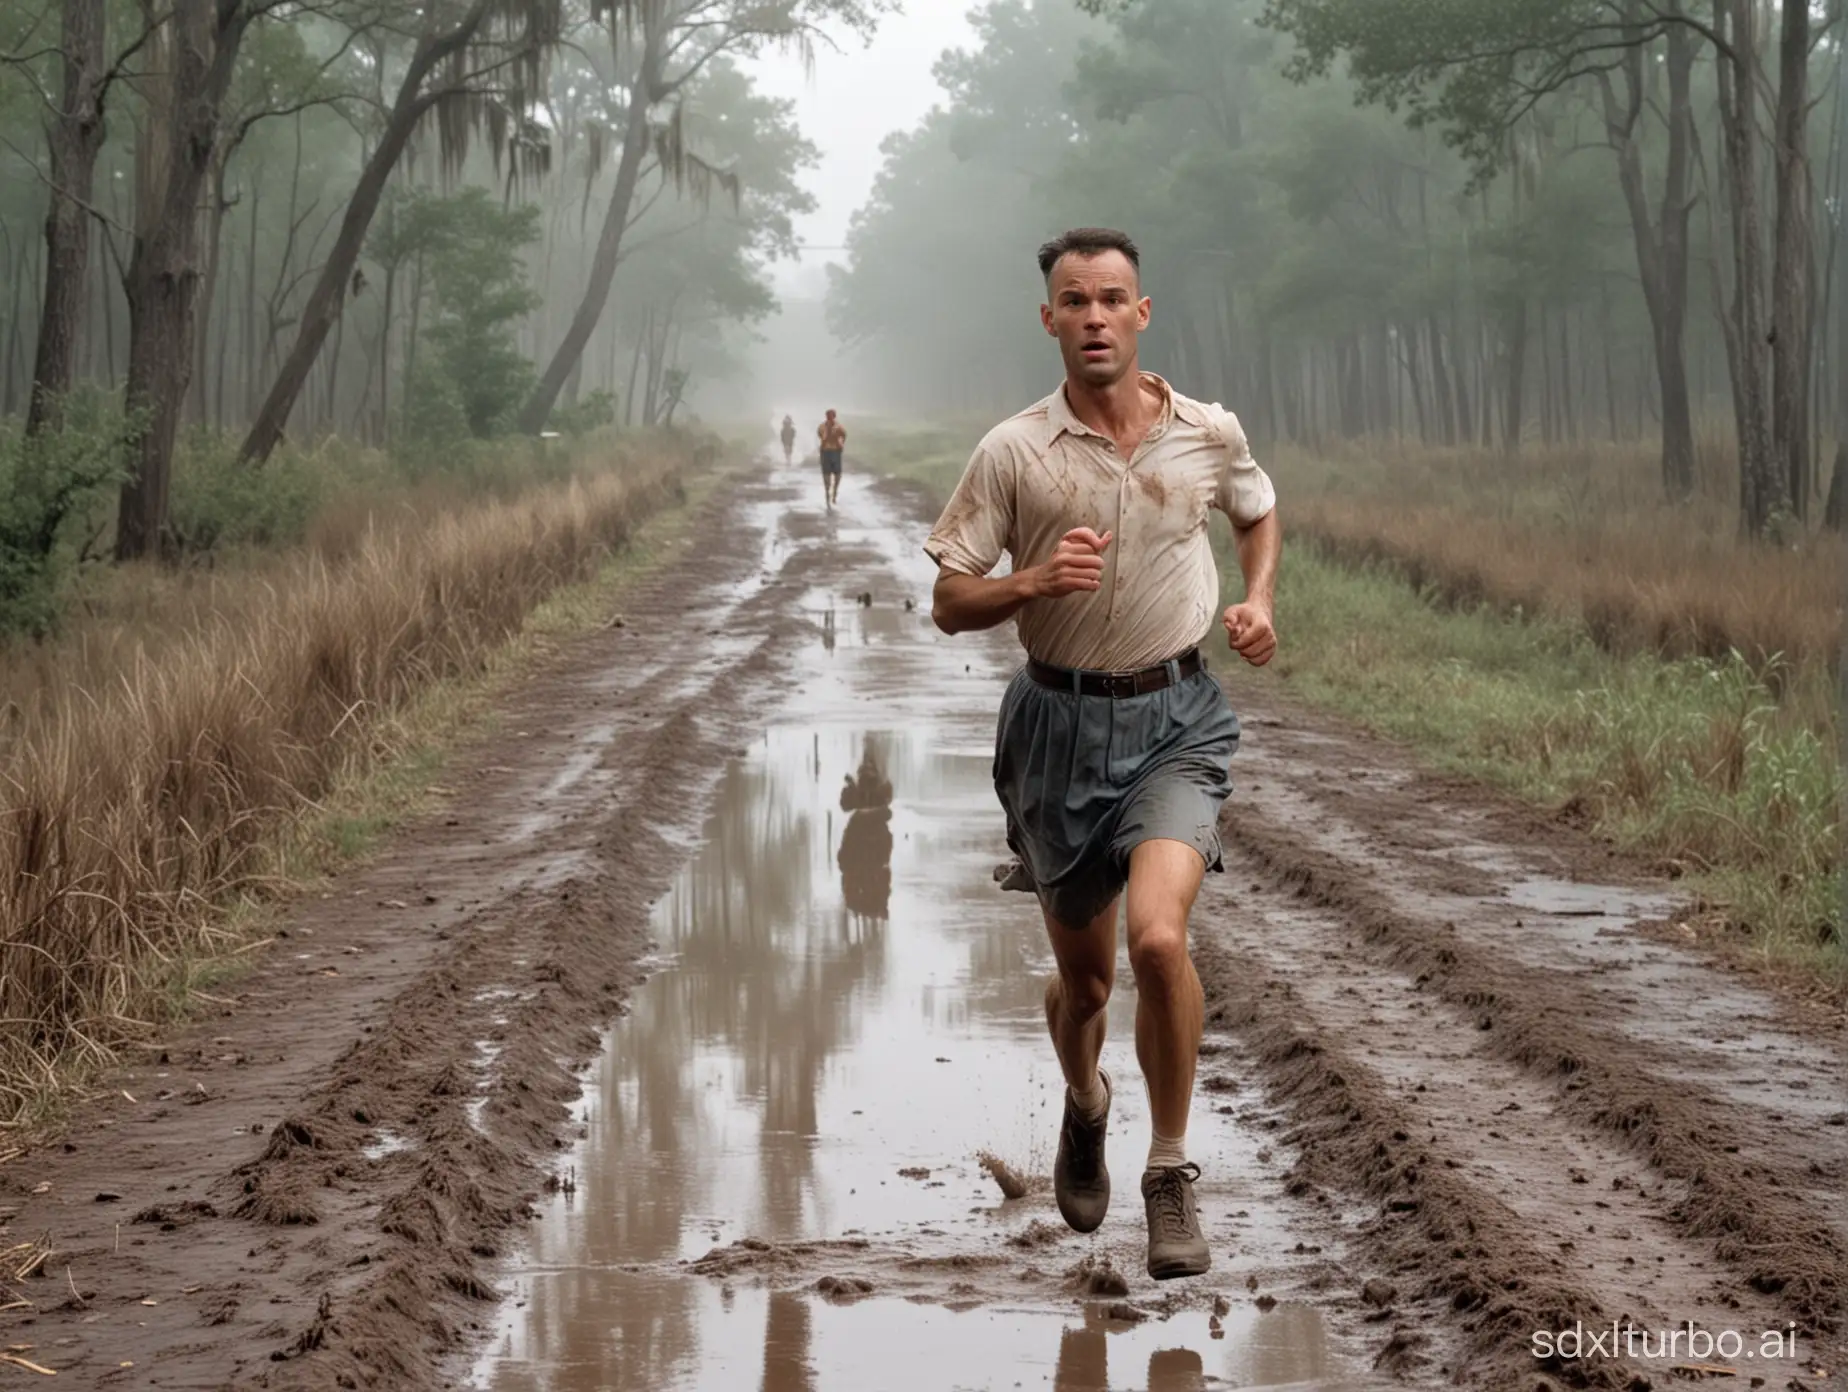 Forrest-Gump-Running-on-a-Muddy-Road